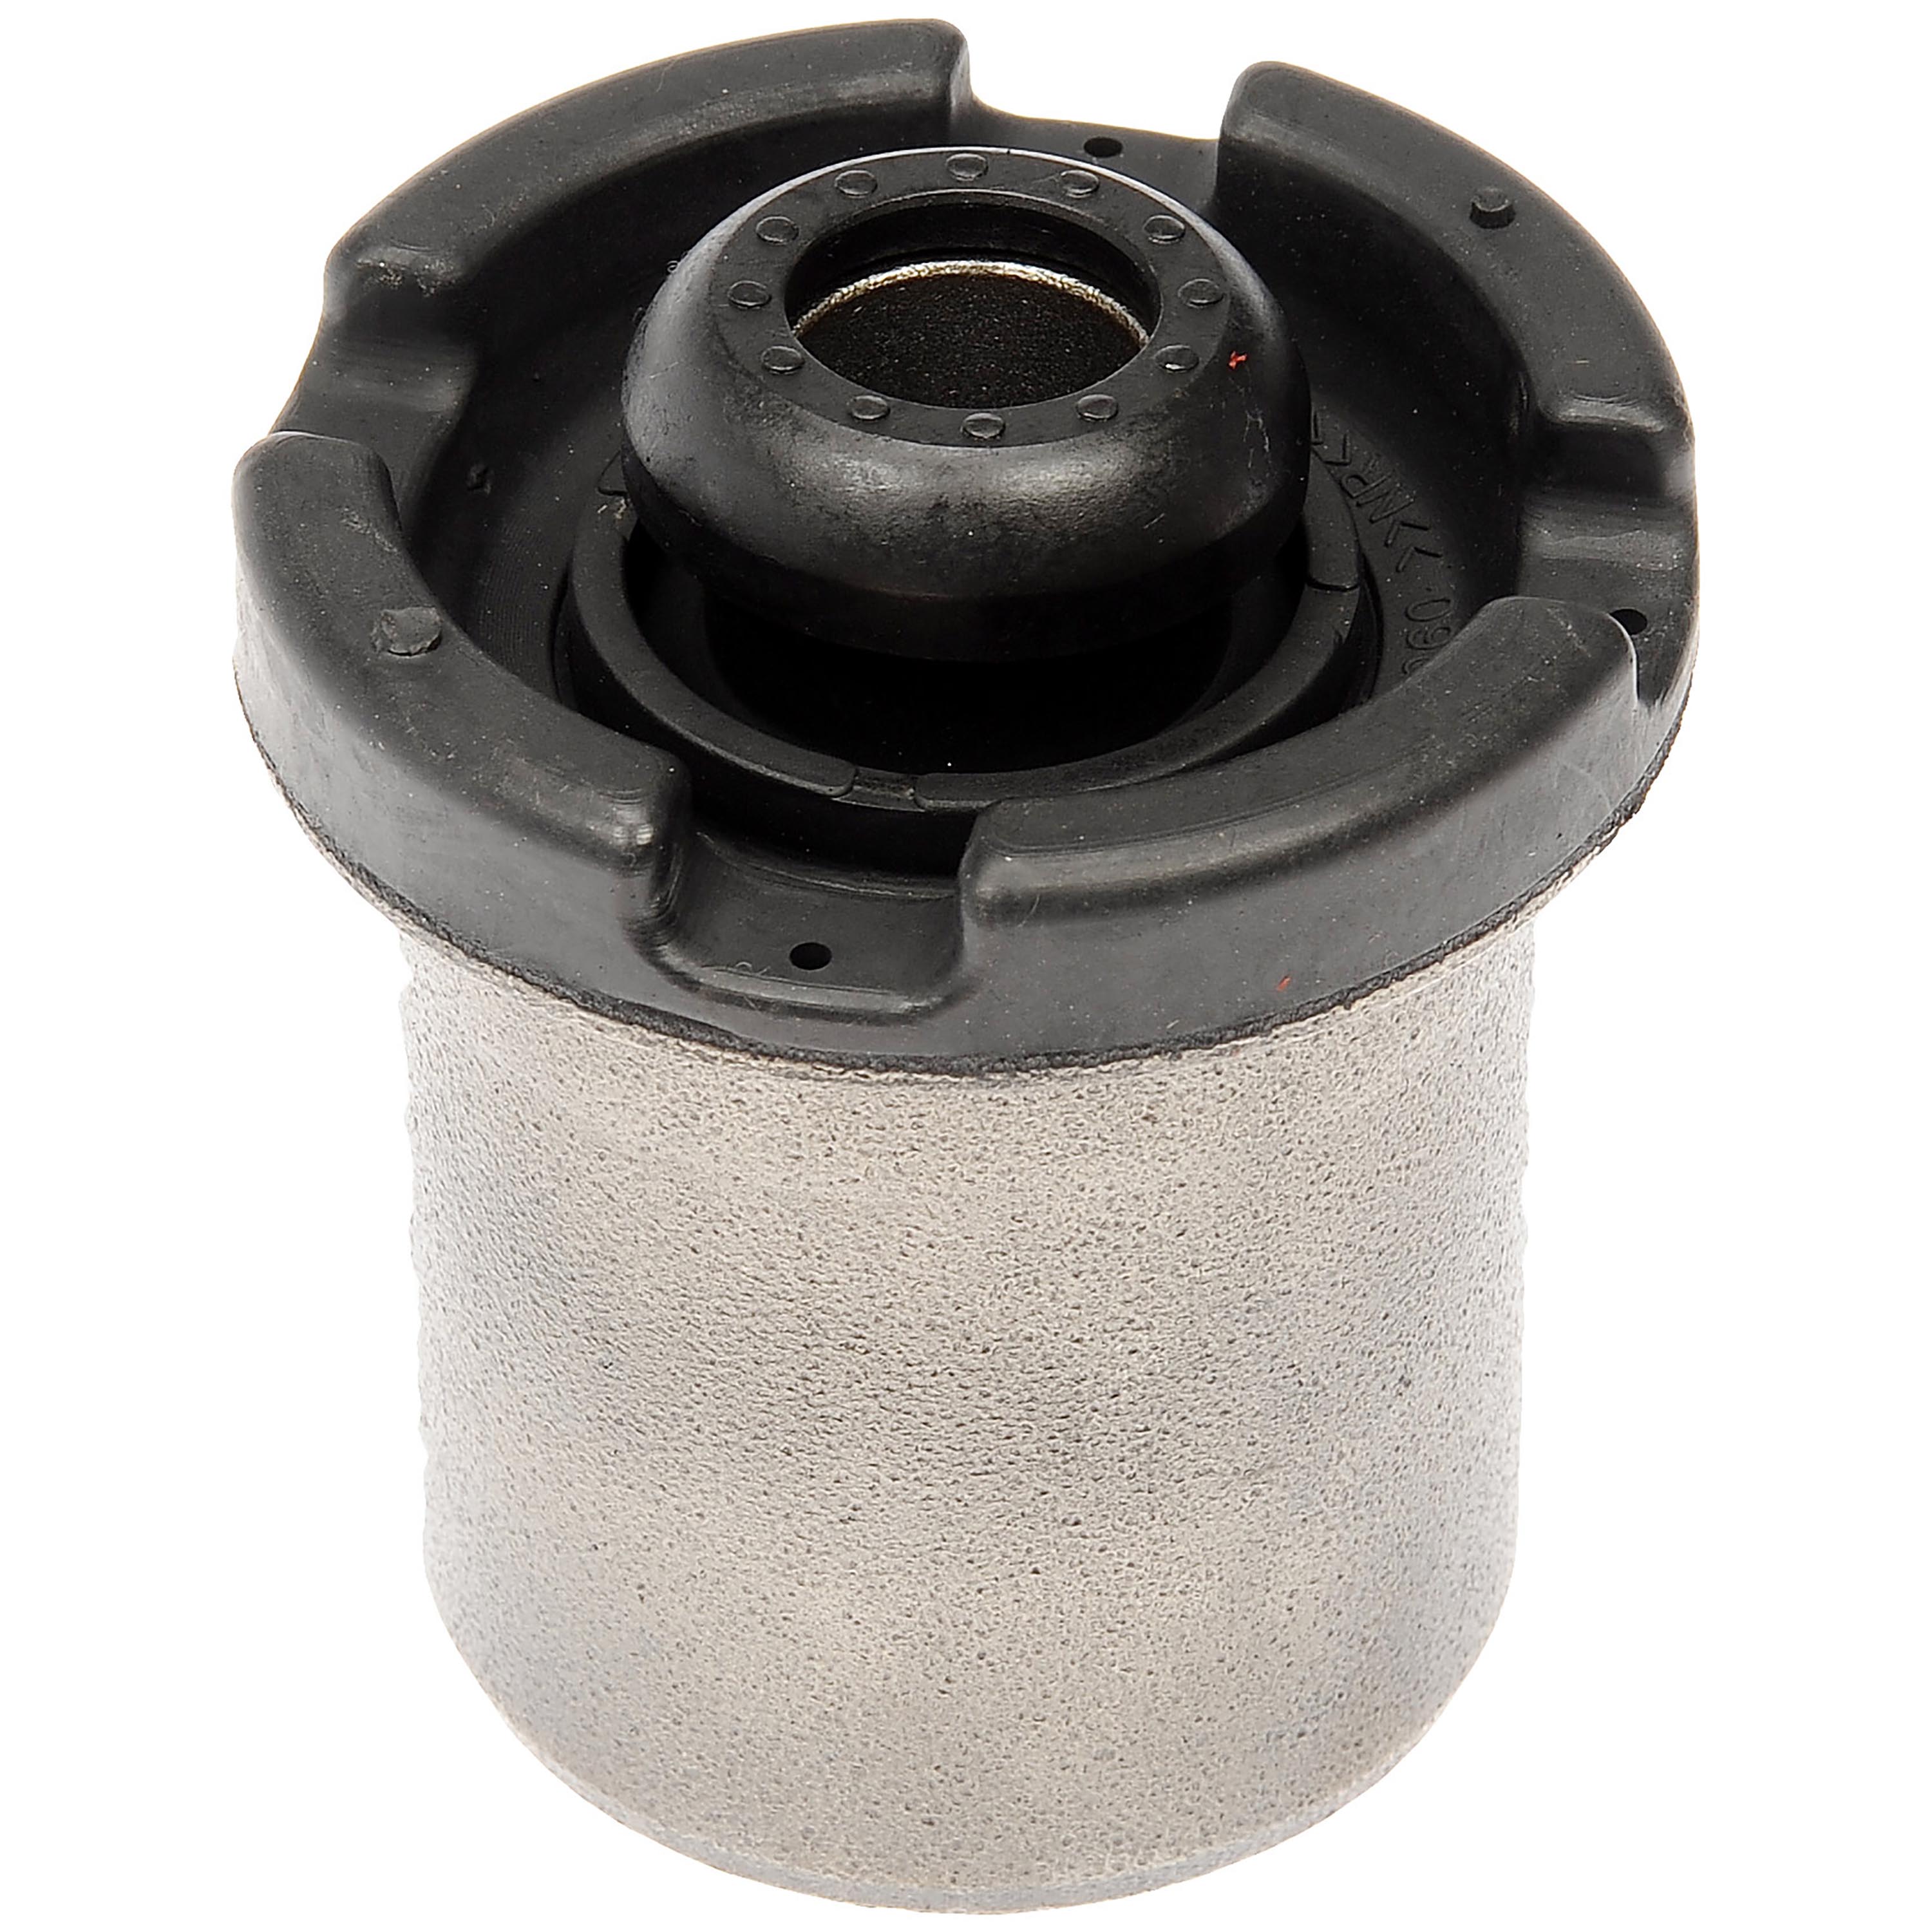 Dorman BC86340PR Suspension Control Arm Bushing for Specific Ford / Lincoln Models Fits select: 2009-2016 FORD F150, 2019 FORD F150 SUPERCREW - image 1 of 4